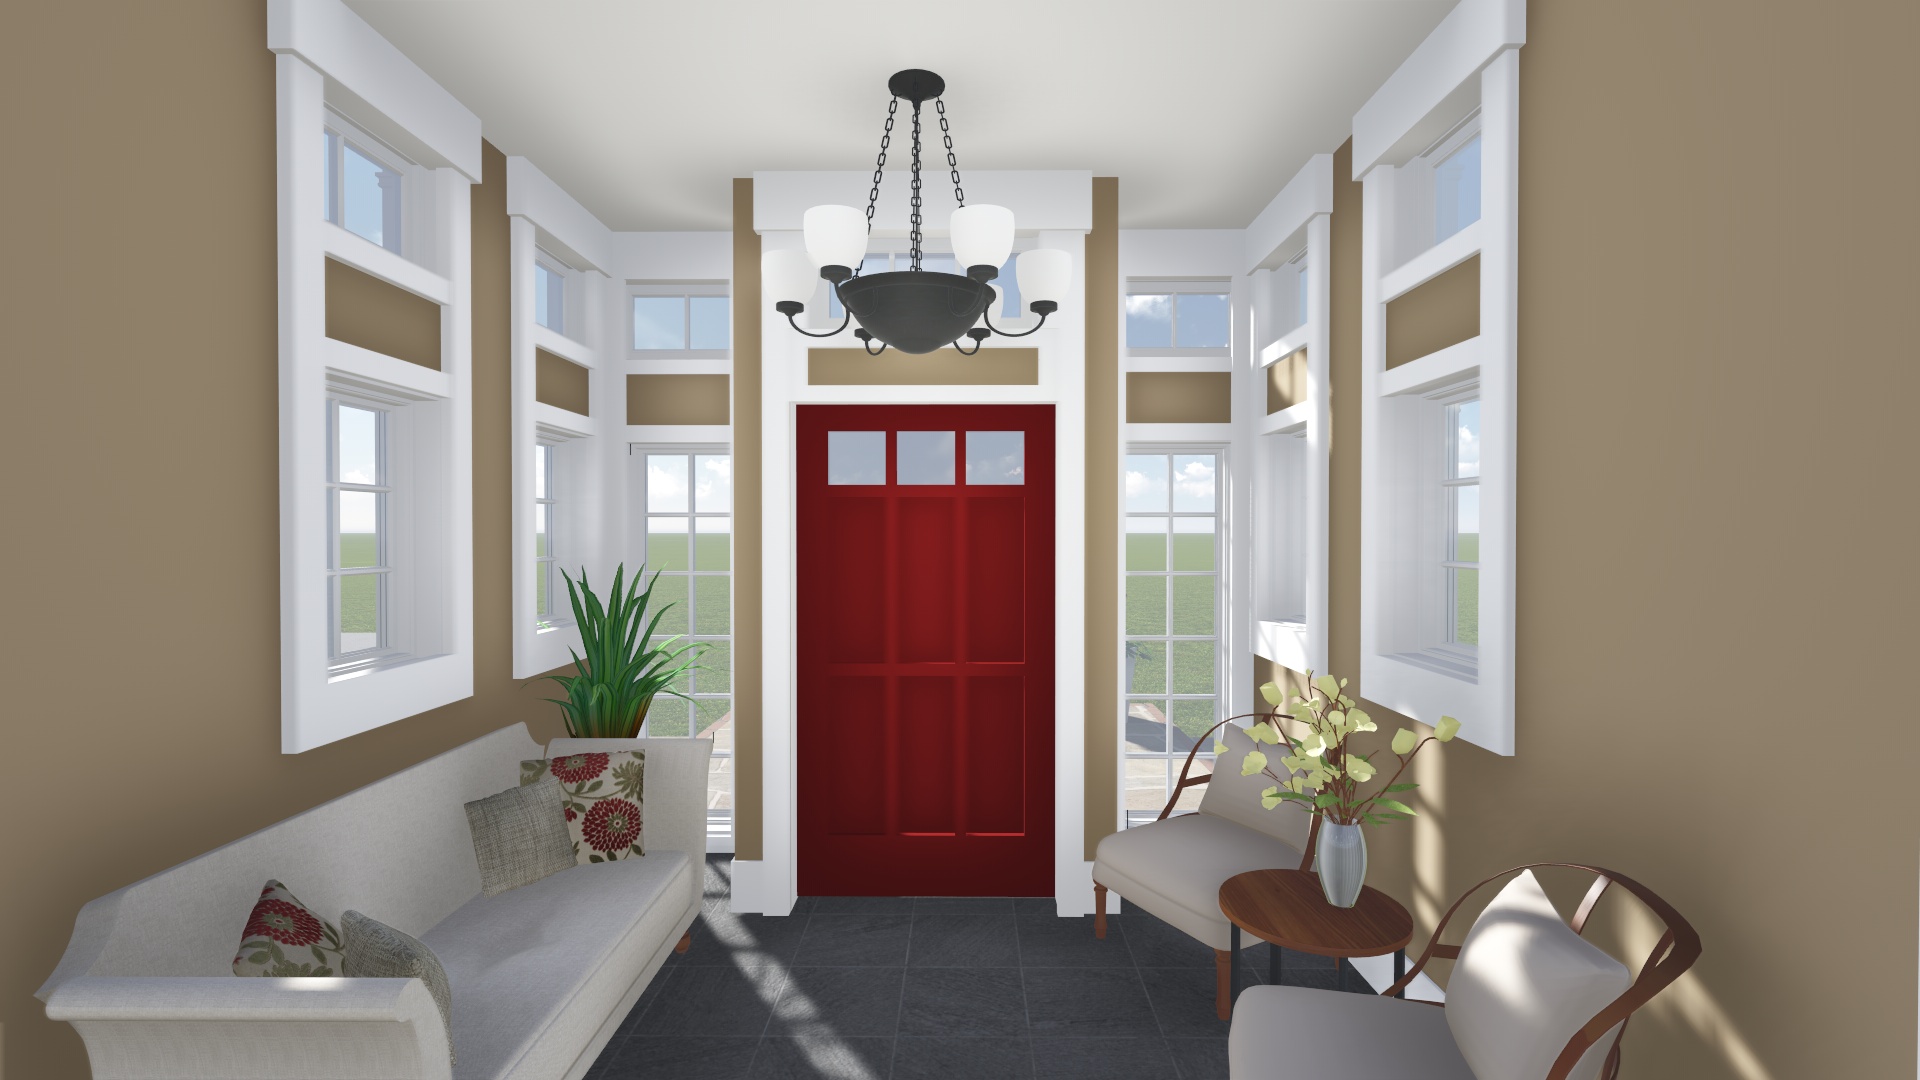 PROCESS: Interior view of entry addition